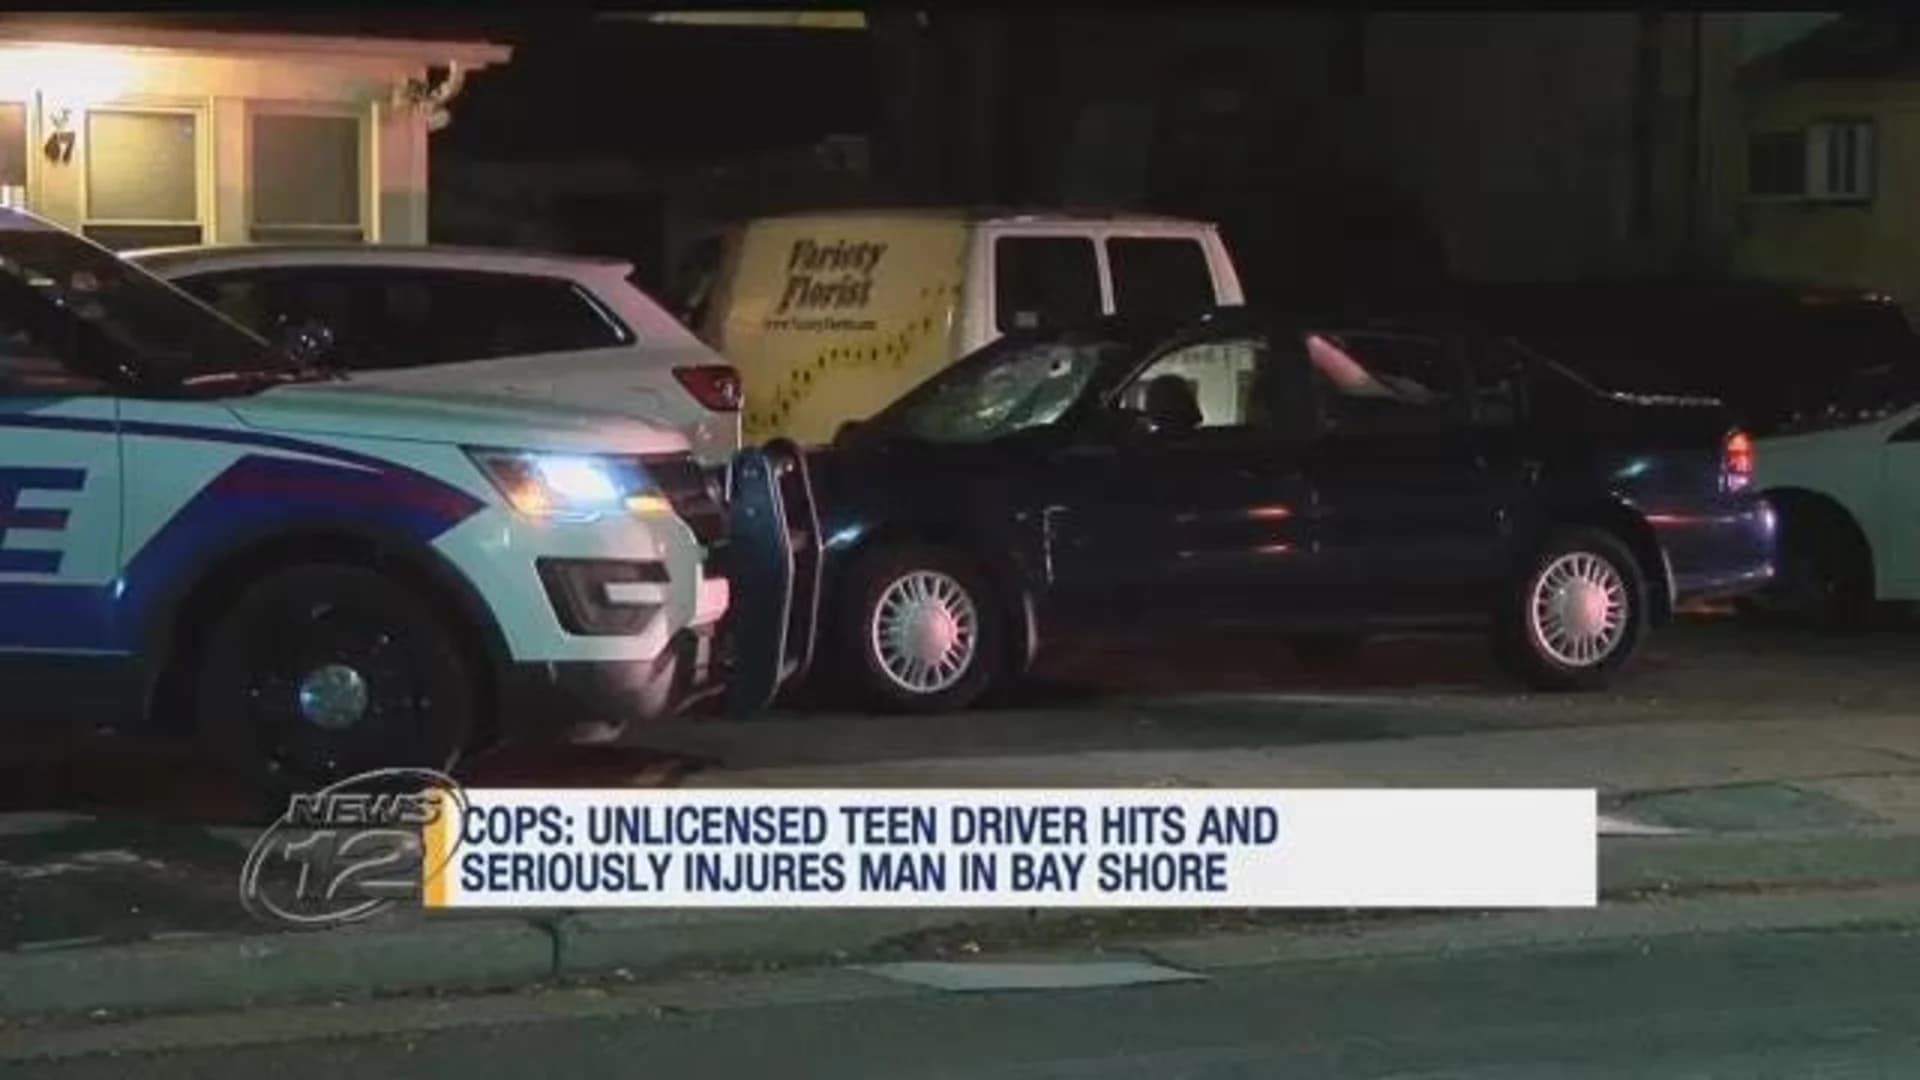 Police: Unlicensed teen driver hits, seriously injures man in Bay Shore